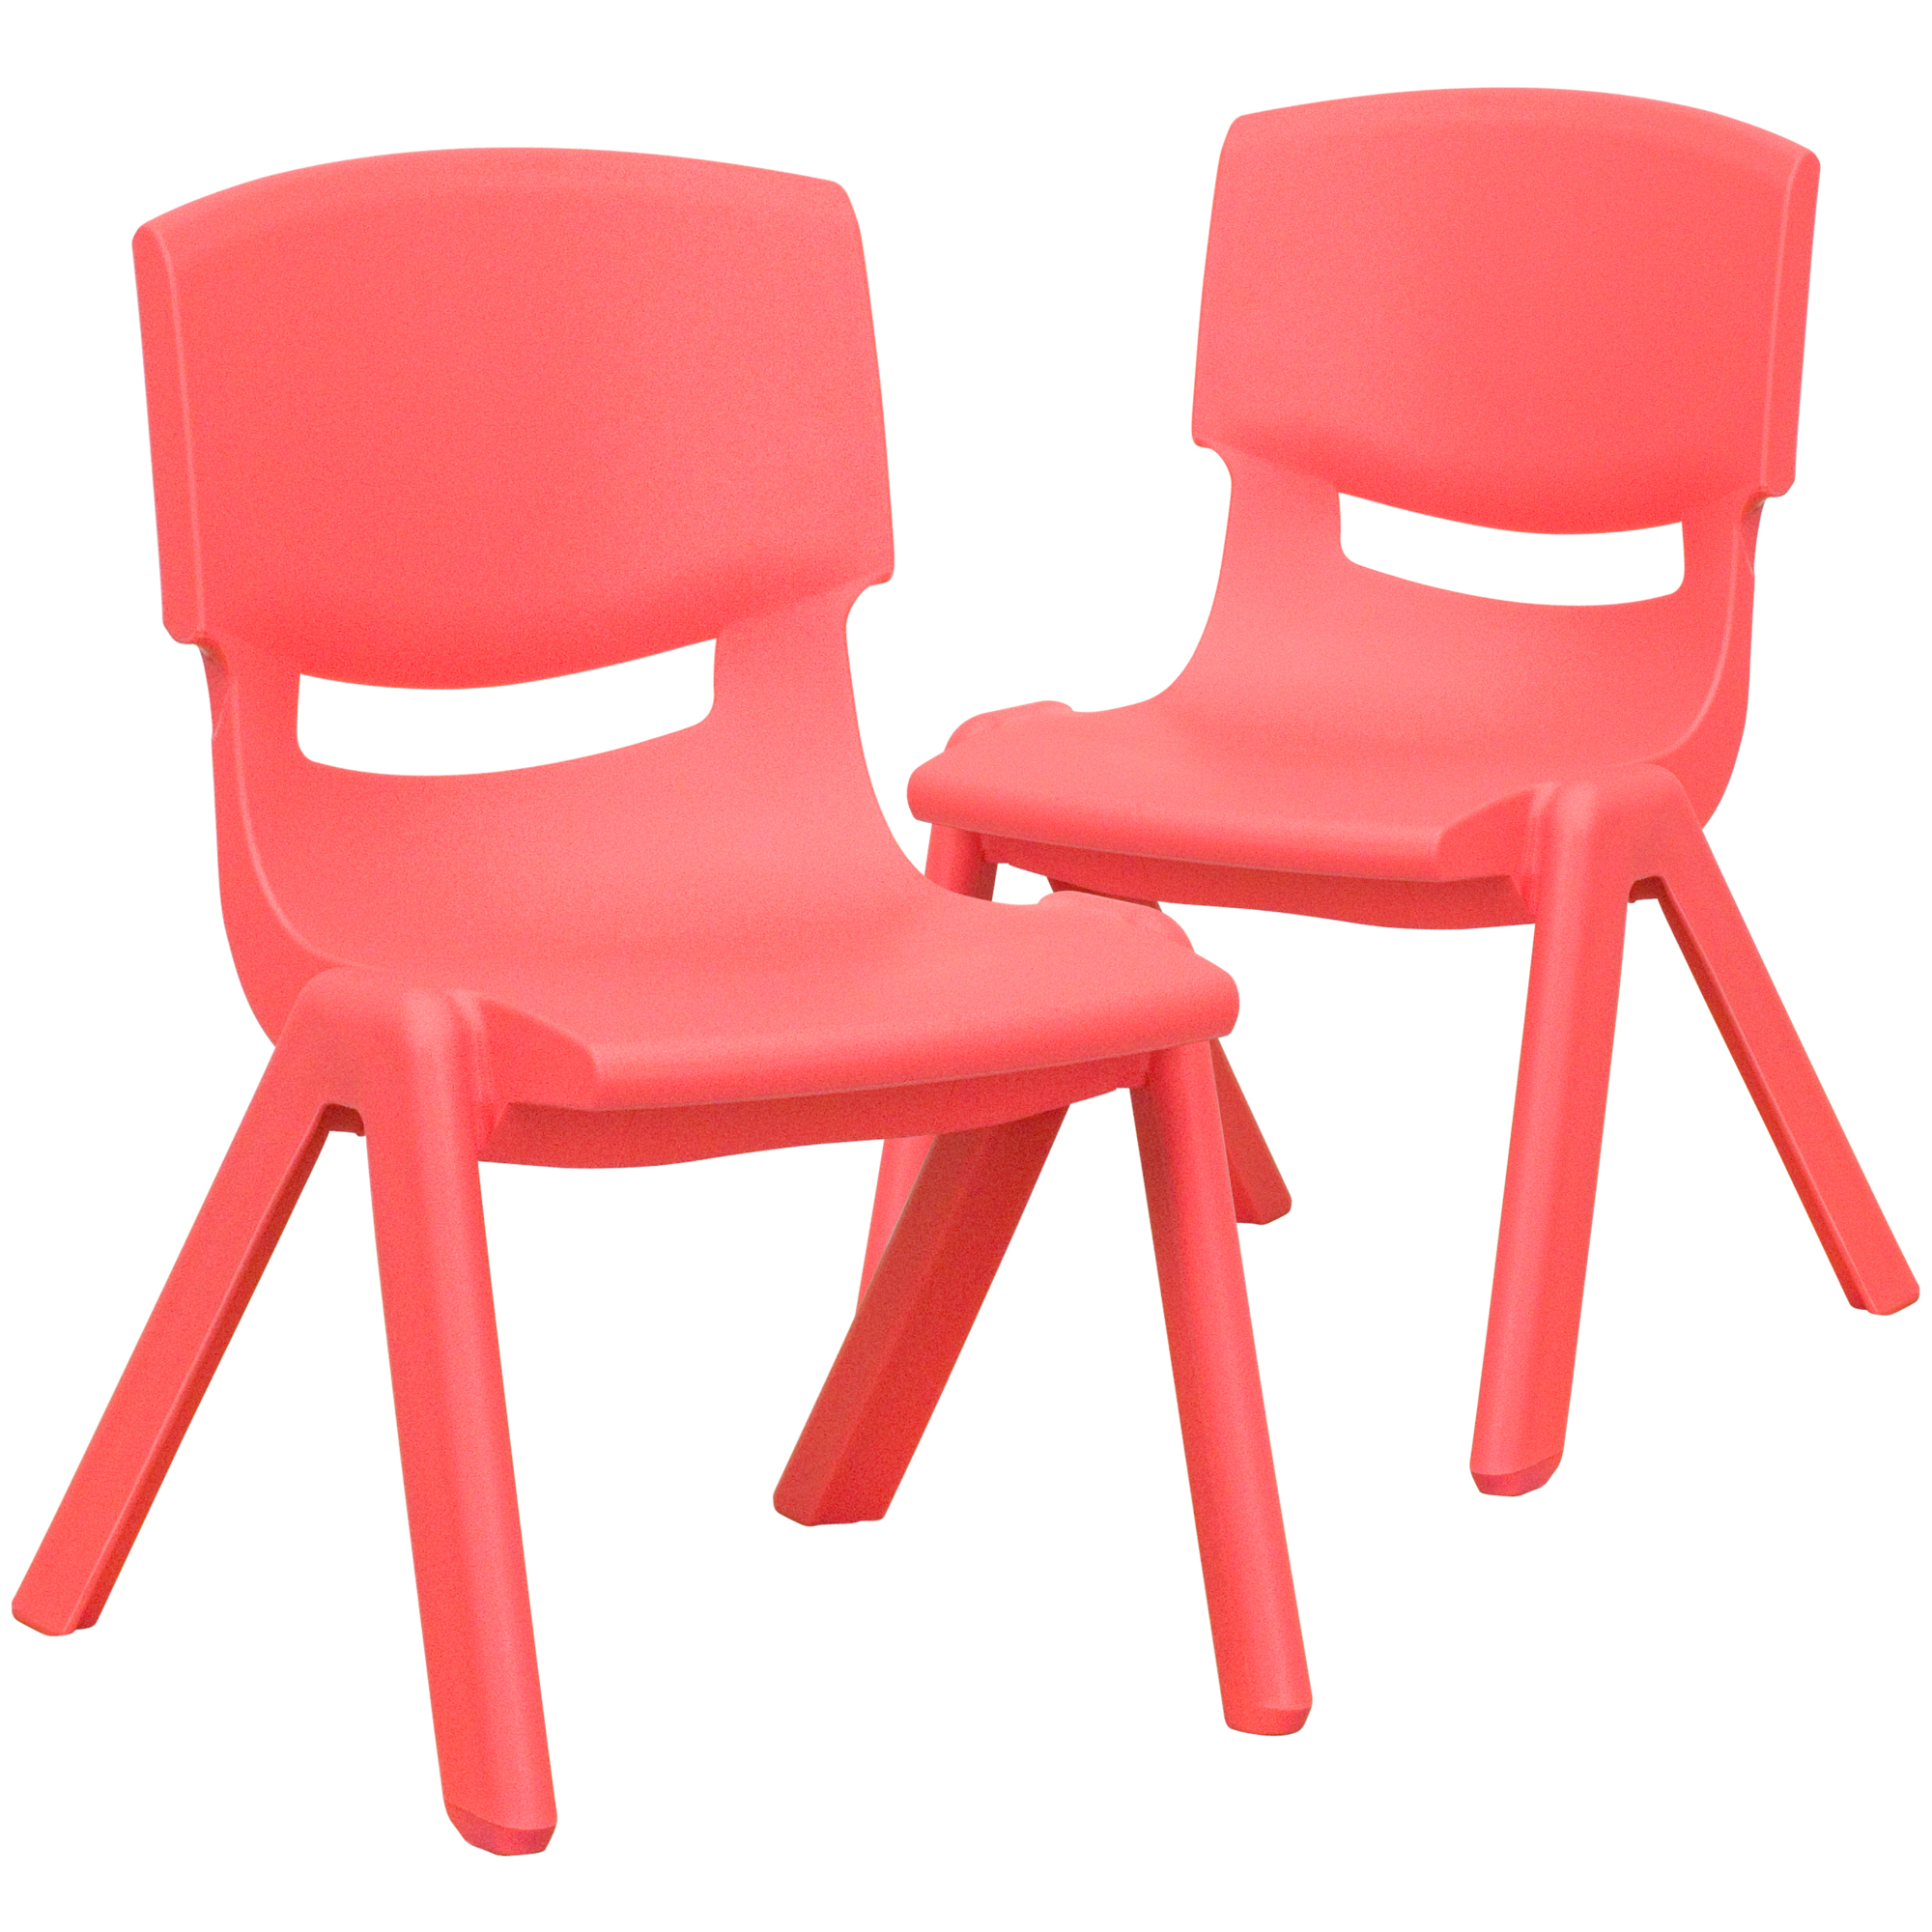 Flash Furniture, 2 Pack Red Plastic School Chair-10.5Inch H Seat, Primary Color Red, Included (qty.) 2, Model 2YUYCX003RED